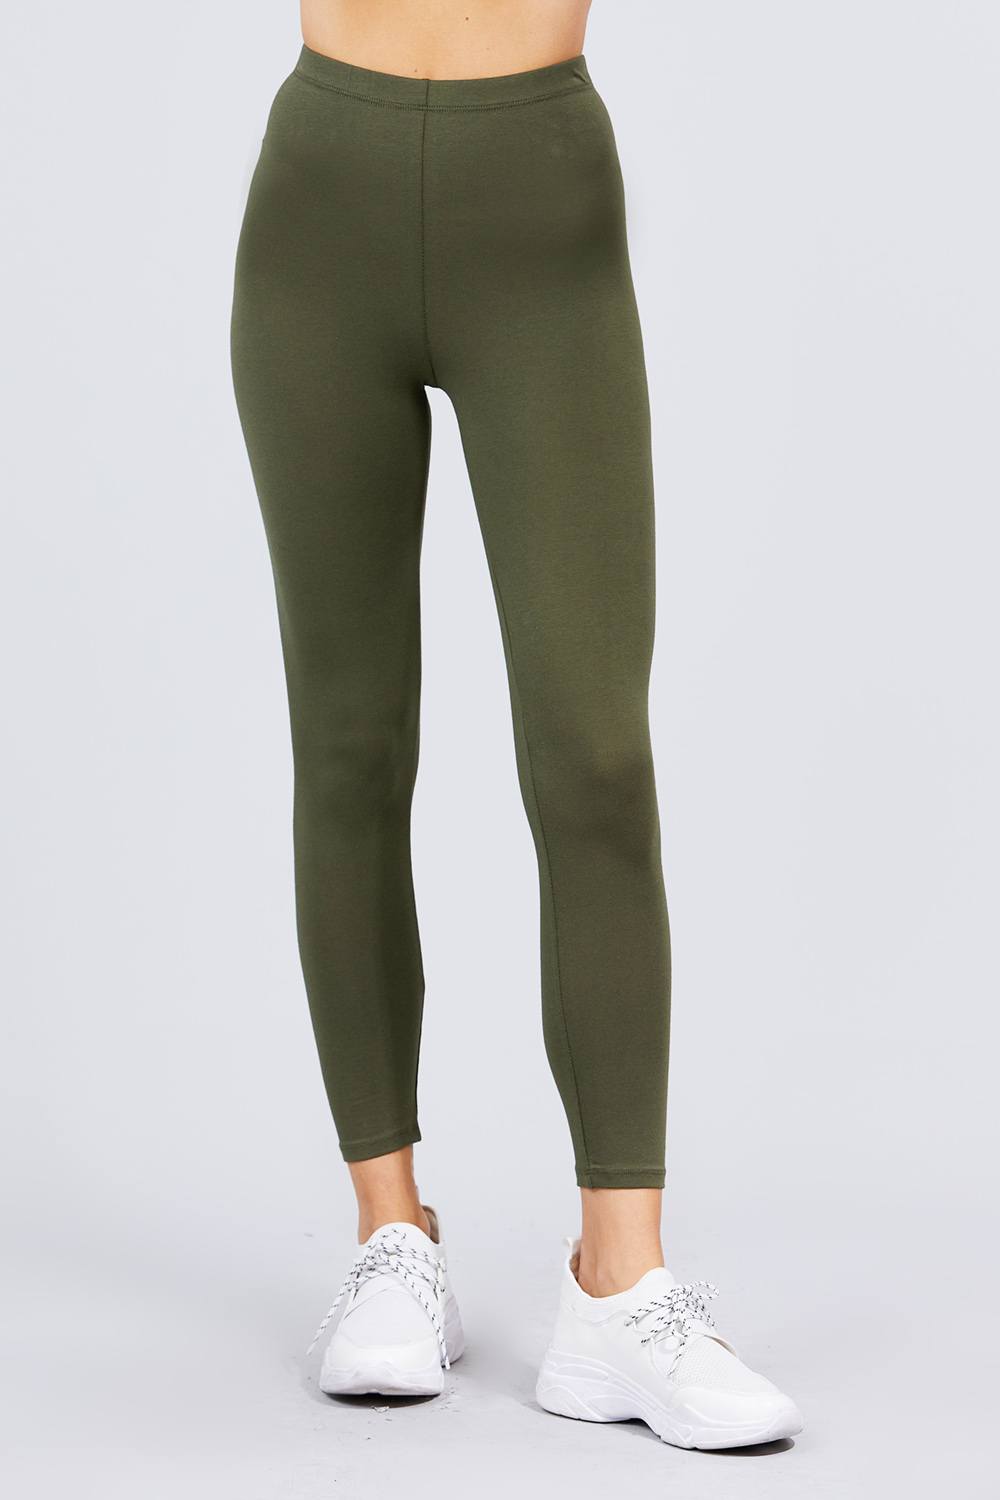 Cotton Spandex Jersey Long - True Olive / S Pants Girl Code